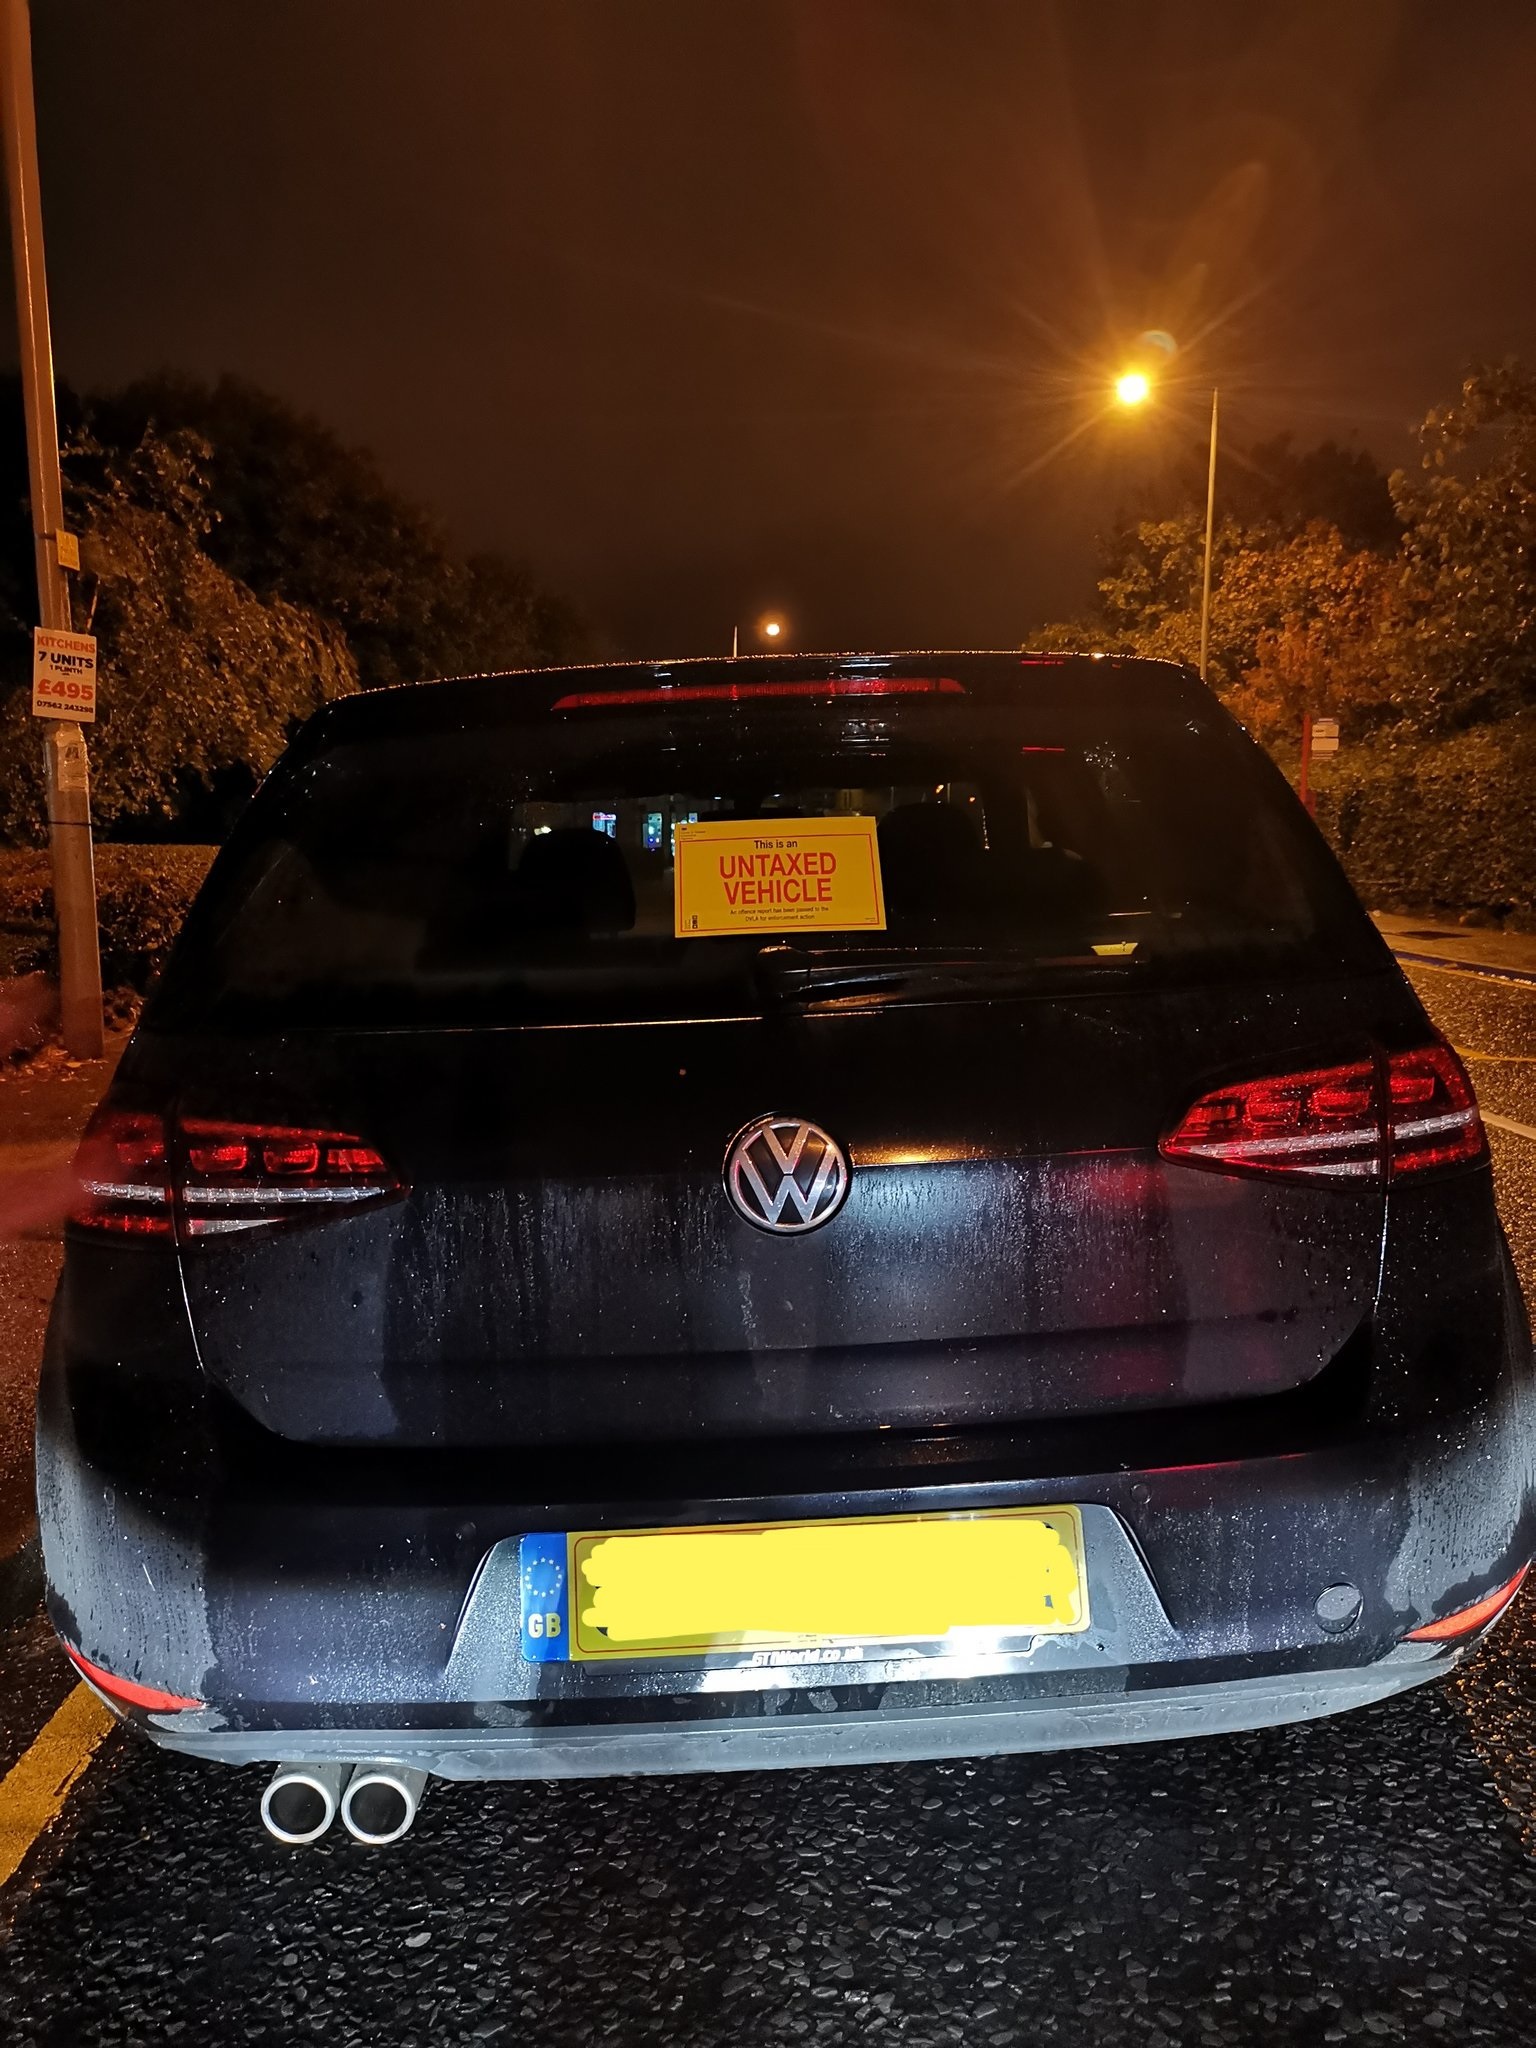 Volkswagen seized by police in Bradford for being untaxed